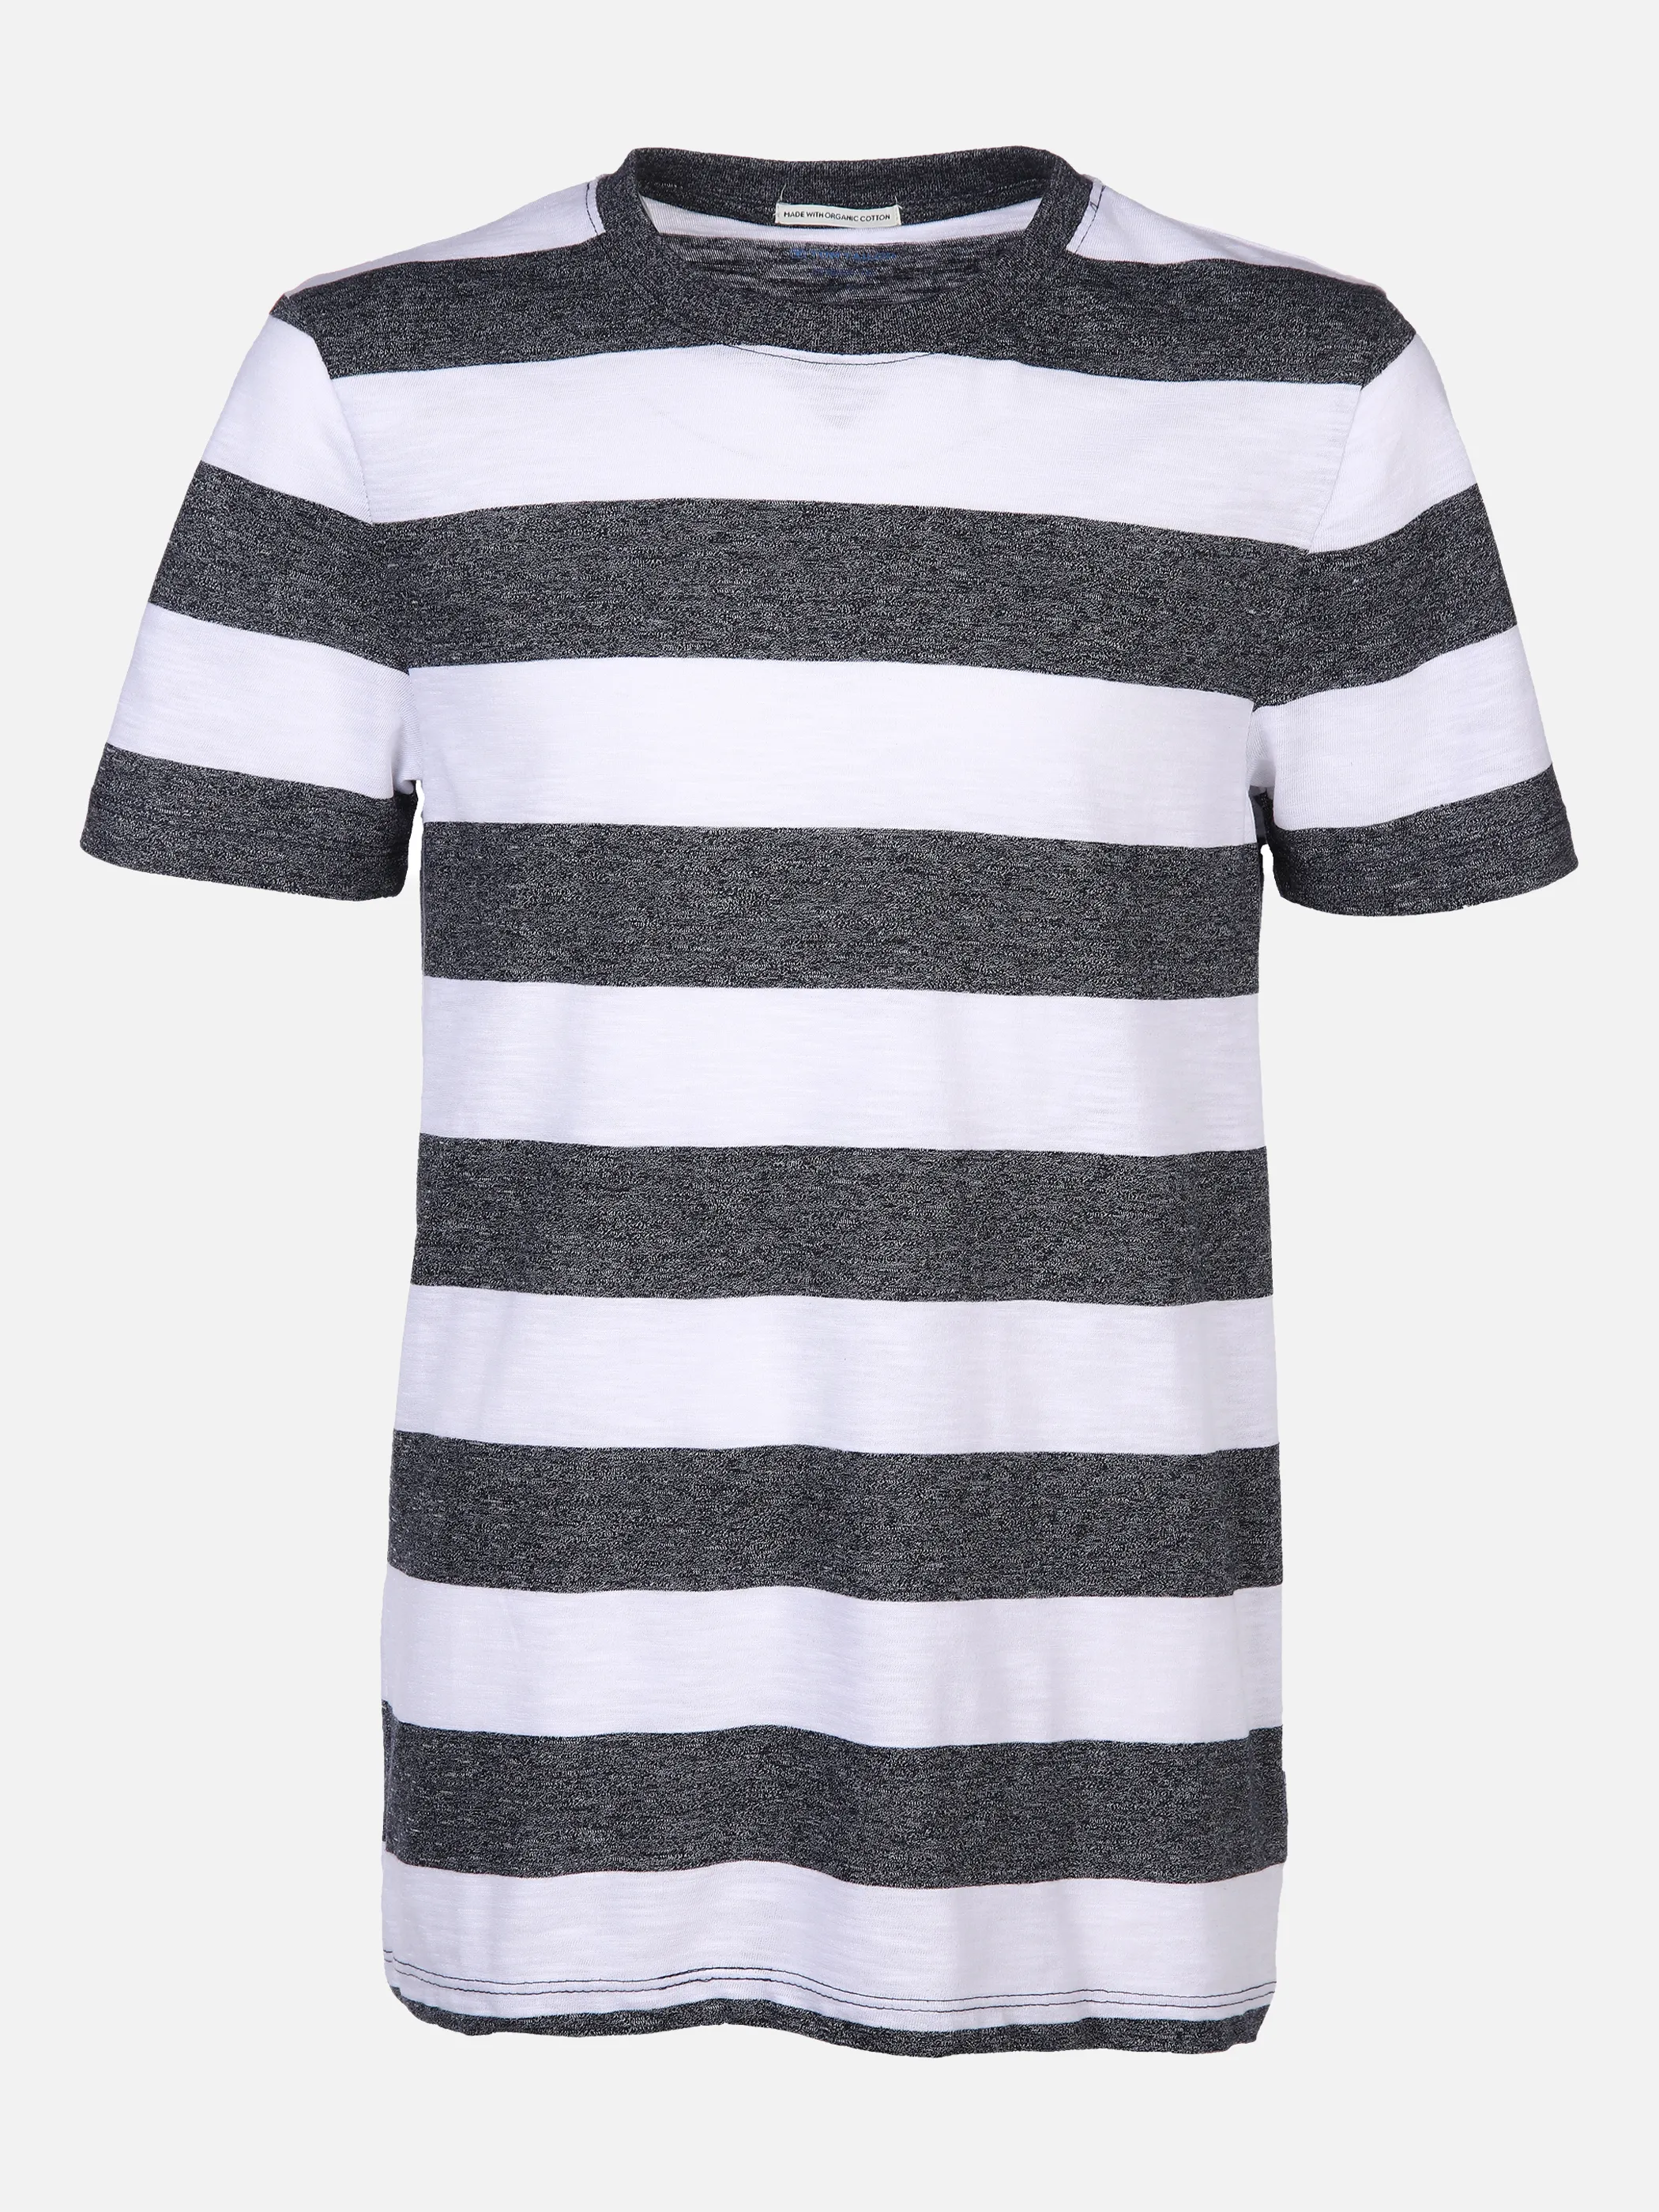 Tom Tailor 1030299 fitted striped t-shirt Blau 860529 29013 1